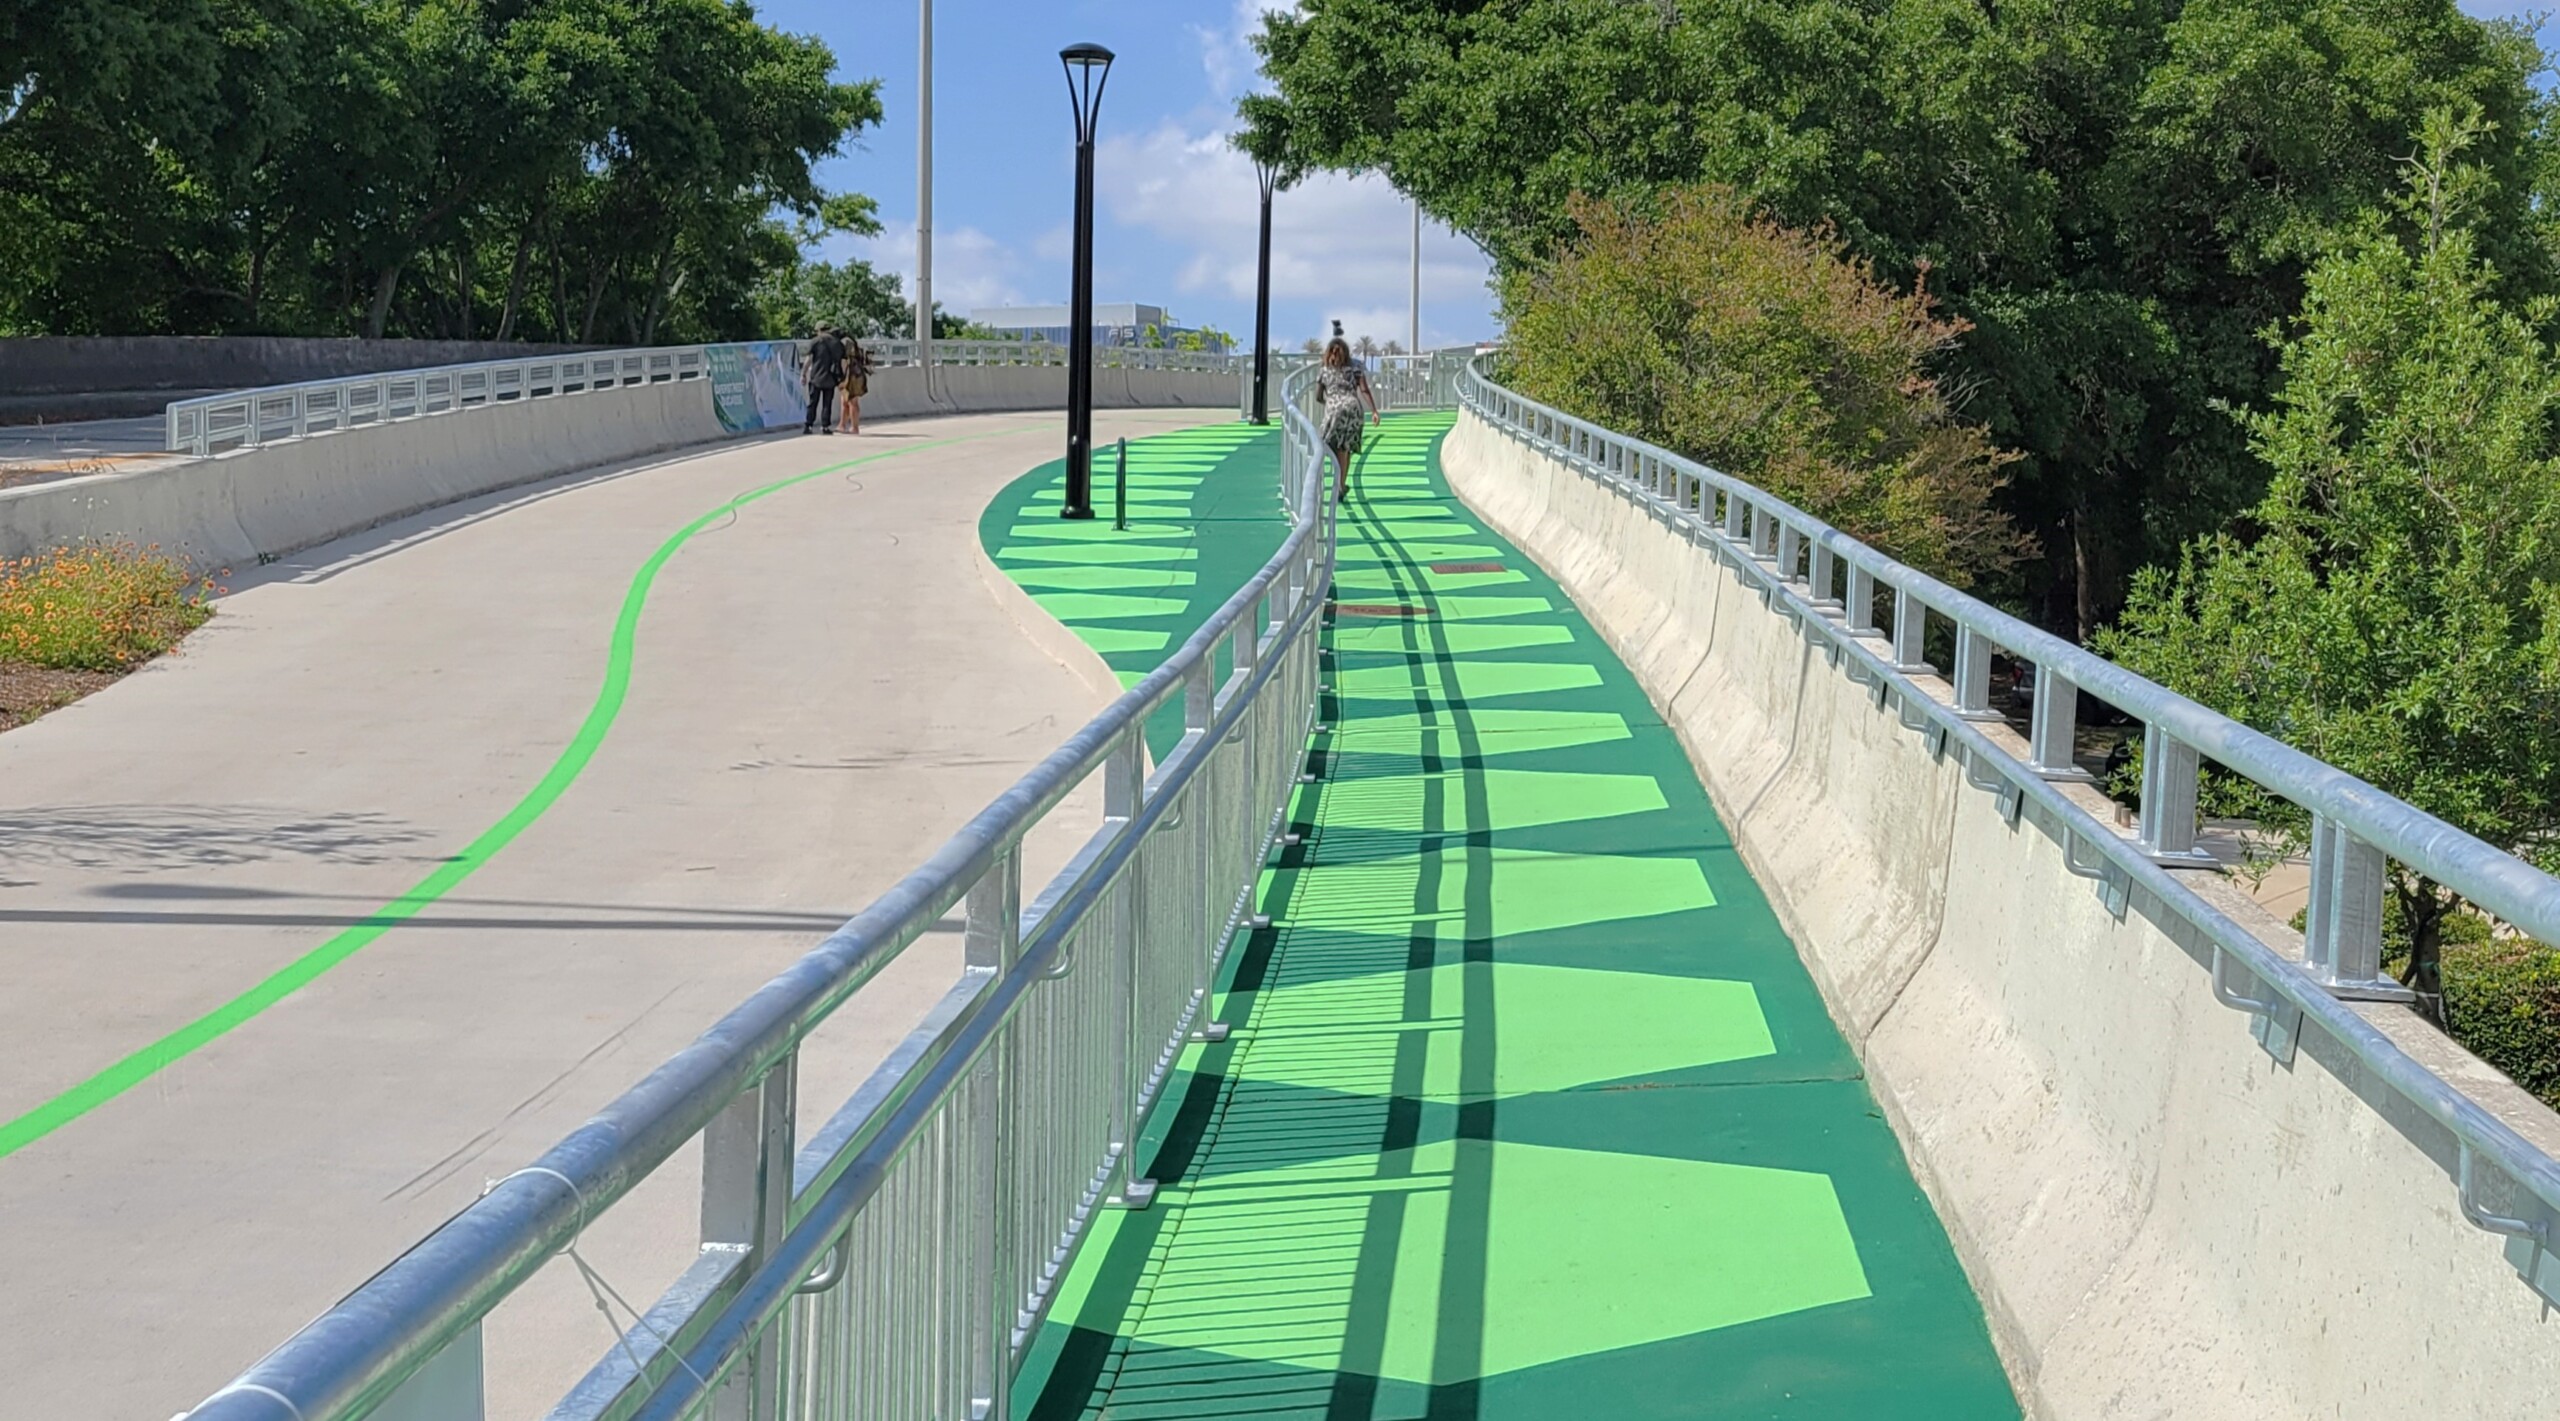 Featured image for “LaVilla Link goes green as first stretch of Emerald Trail opens”